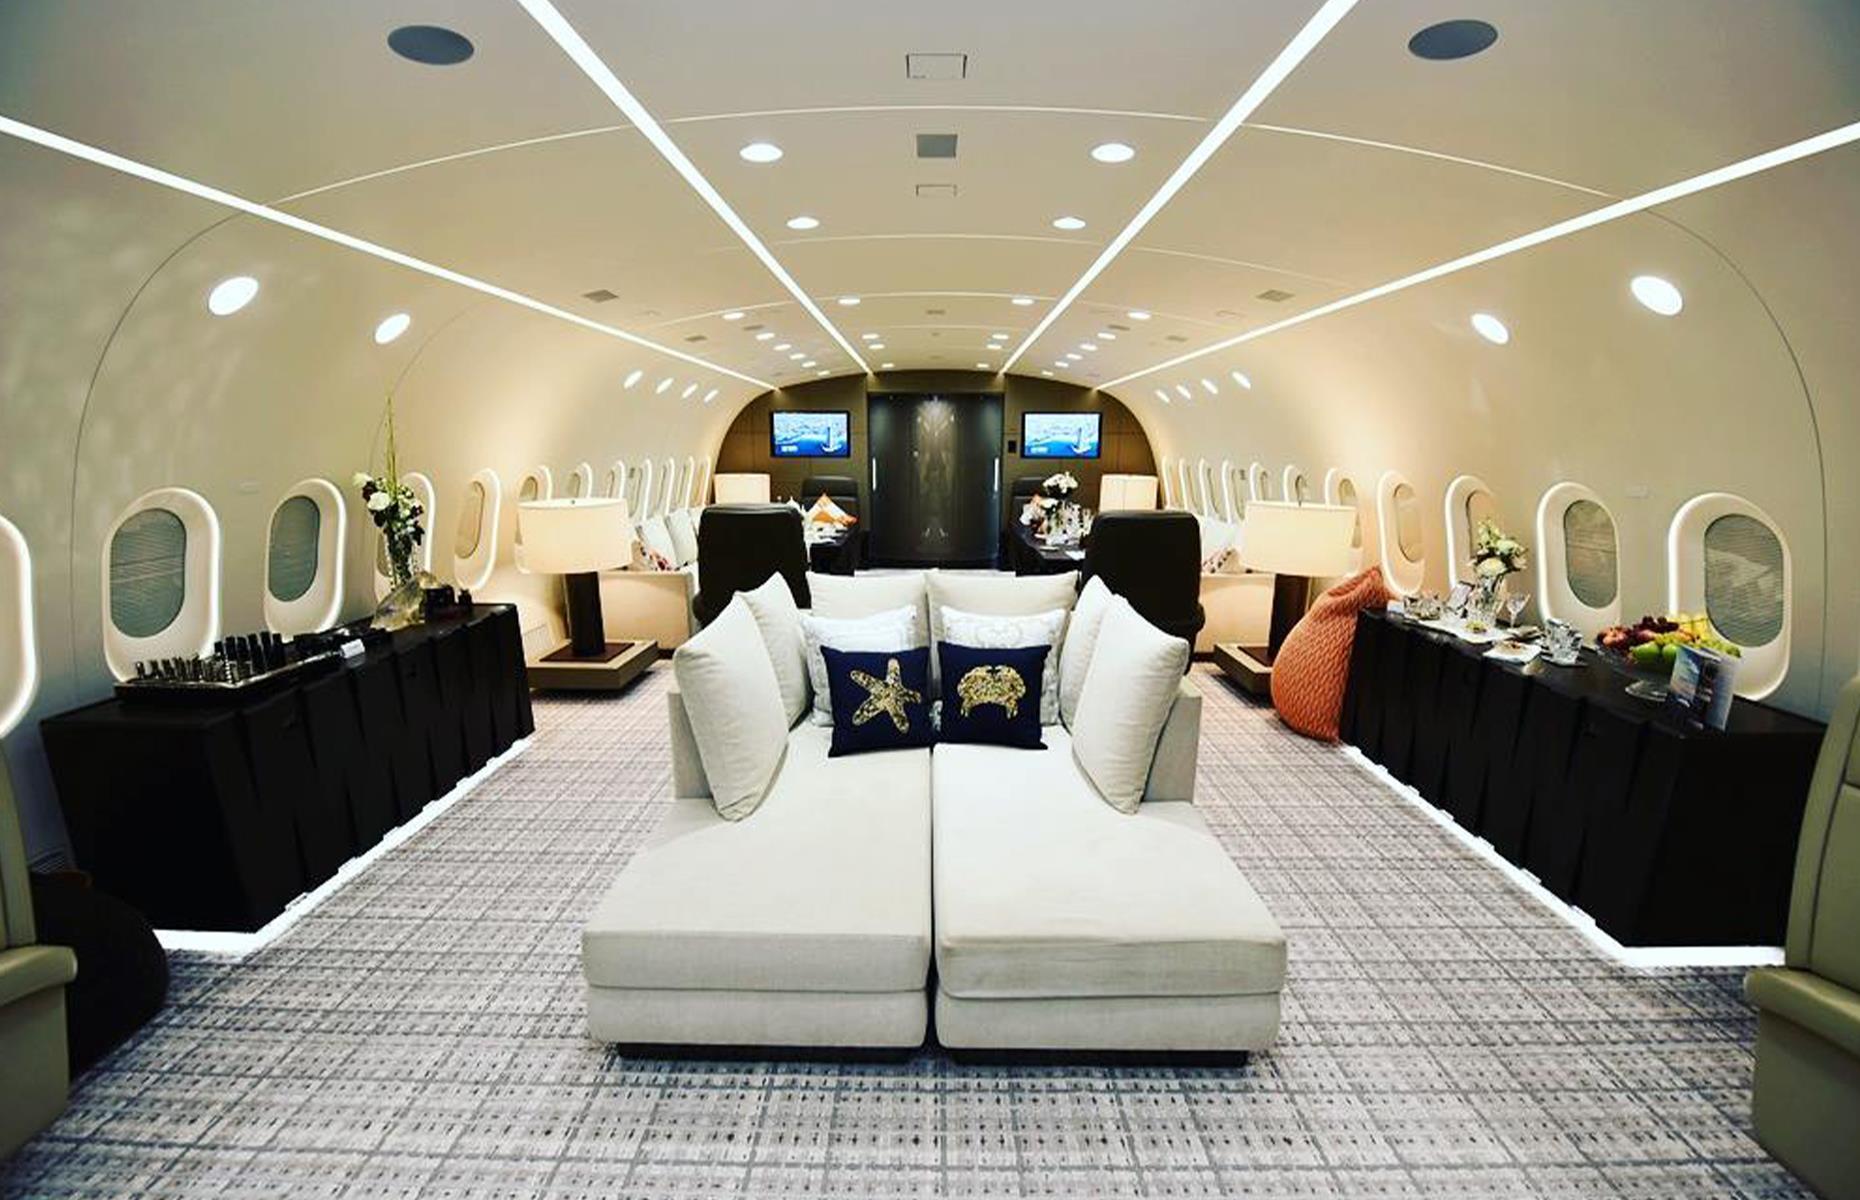 <p>In the two years before everything went sour, HNA promoted the 40-seat plane as having "luxuriously organic" interiors, expertly overseen by the Pierre Jean Design Studio of Paris.</p>  <p>Details of note included hardwood floors, marble bathrooms, and hand-tufted carpets, among others.</p>  <p>While the higher-ups at HNA Group were the most frequent users of the plane, a subsidiary company called Deer Jet also chartered it out for an estimated $70,000 an hour.</p>